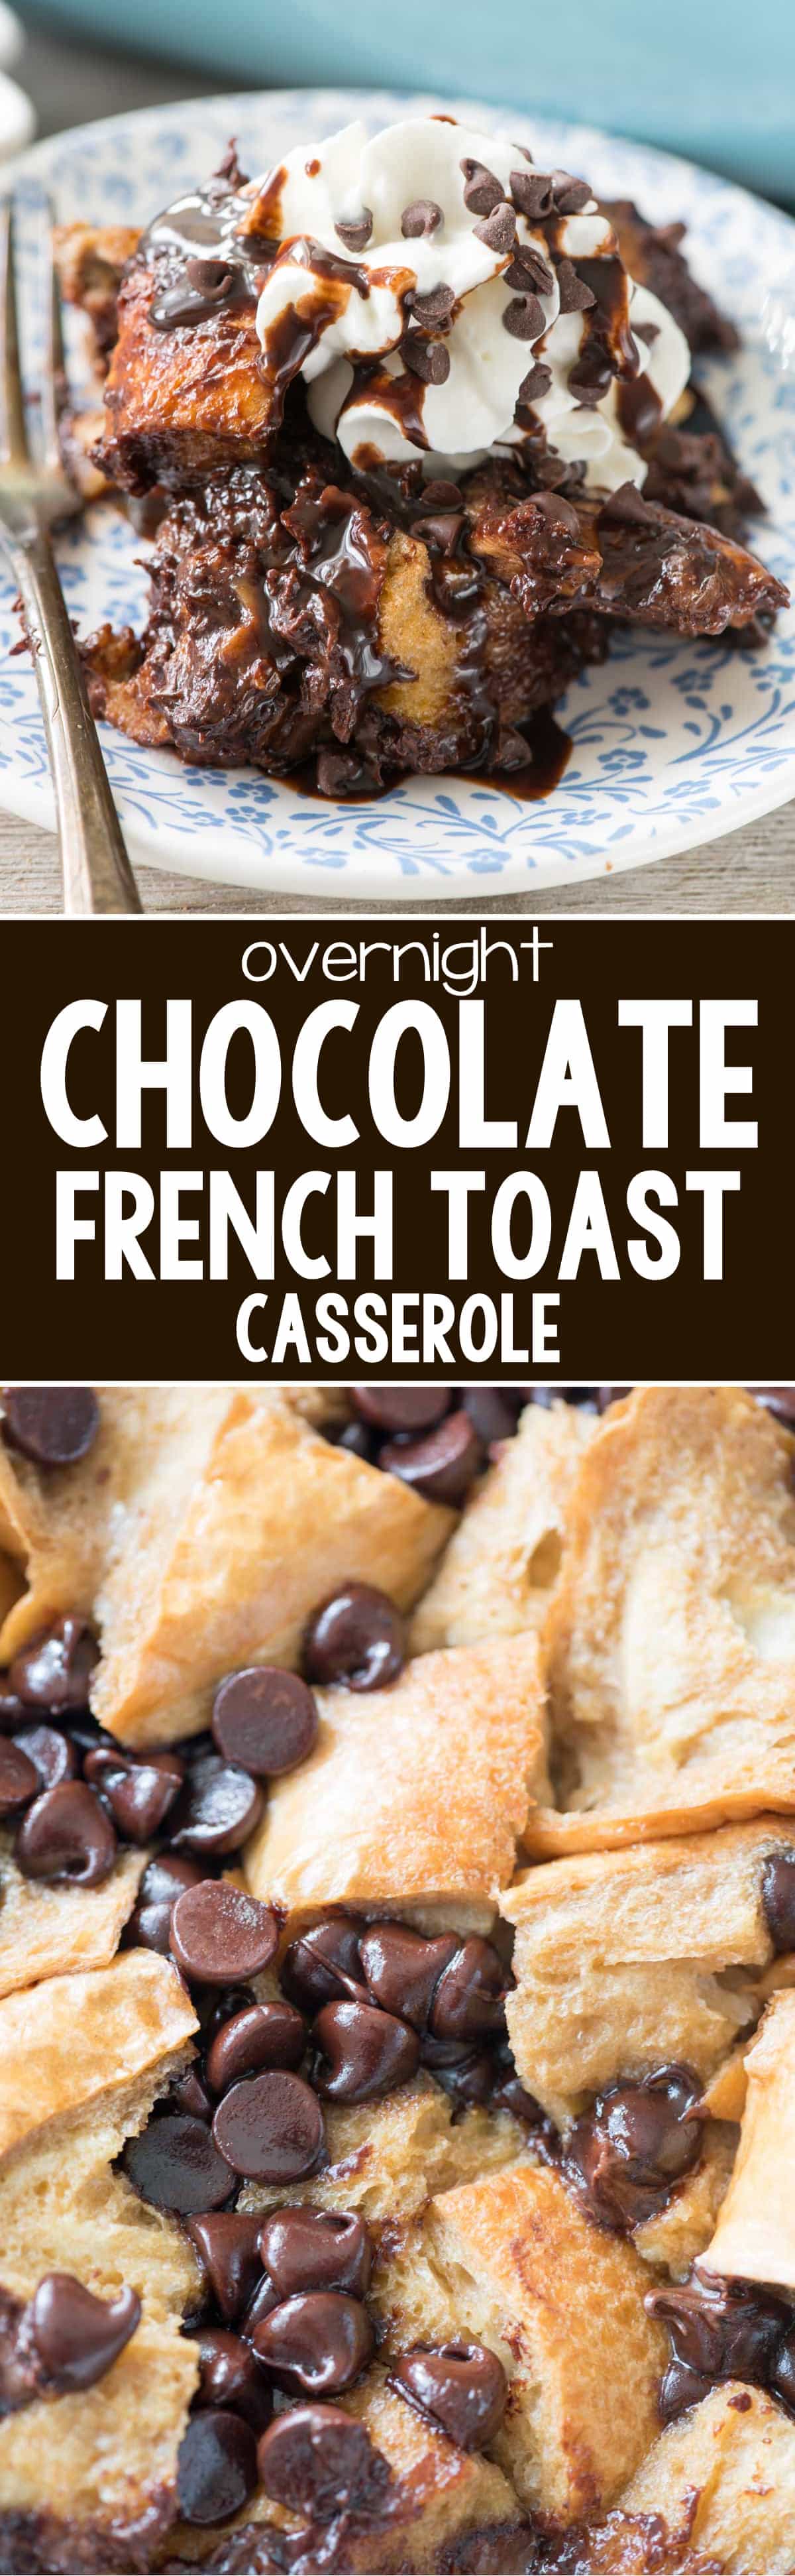 Chocolate French Toast Casserole - this easy overnight french toast recipe is full of chocolate from the milk to the chocolate chips! It's the perfect indulgent brunch recipe!